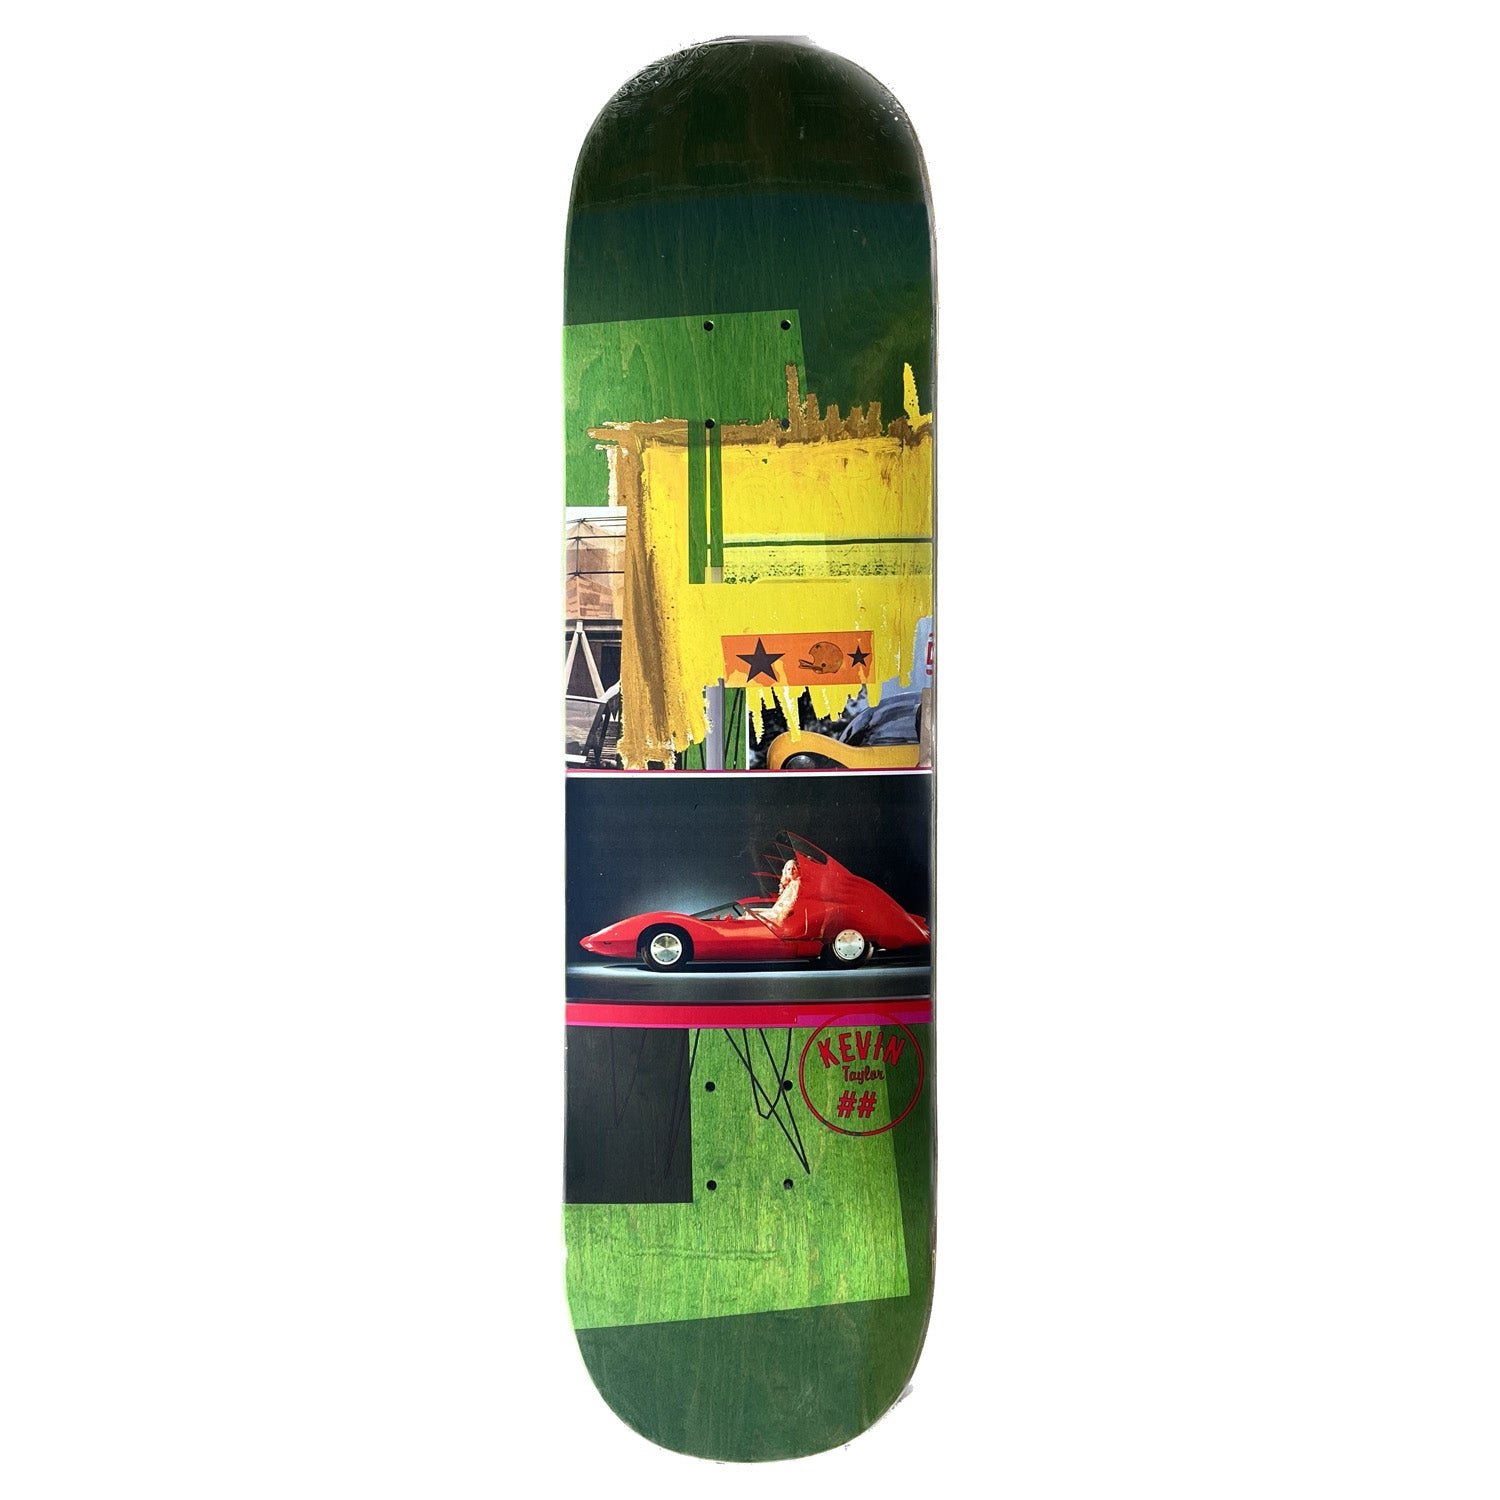 Scumco & Sons Kevin Taylor Supersonic Deck 8.0"